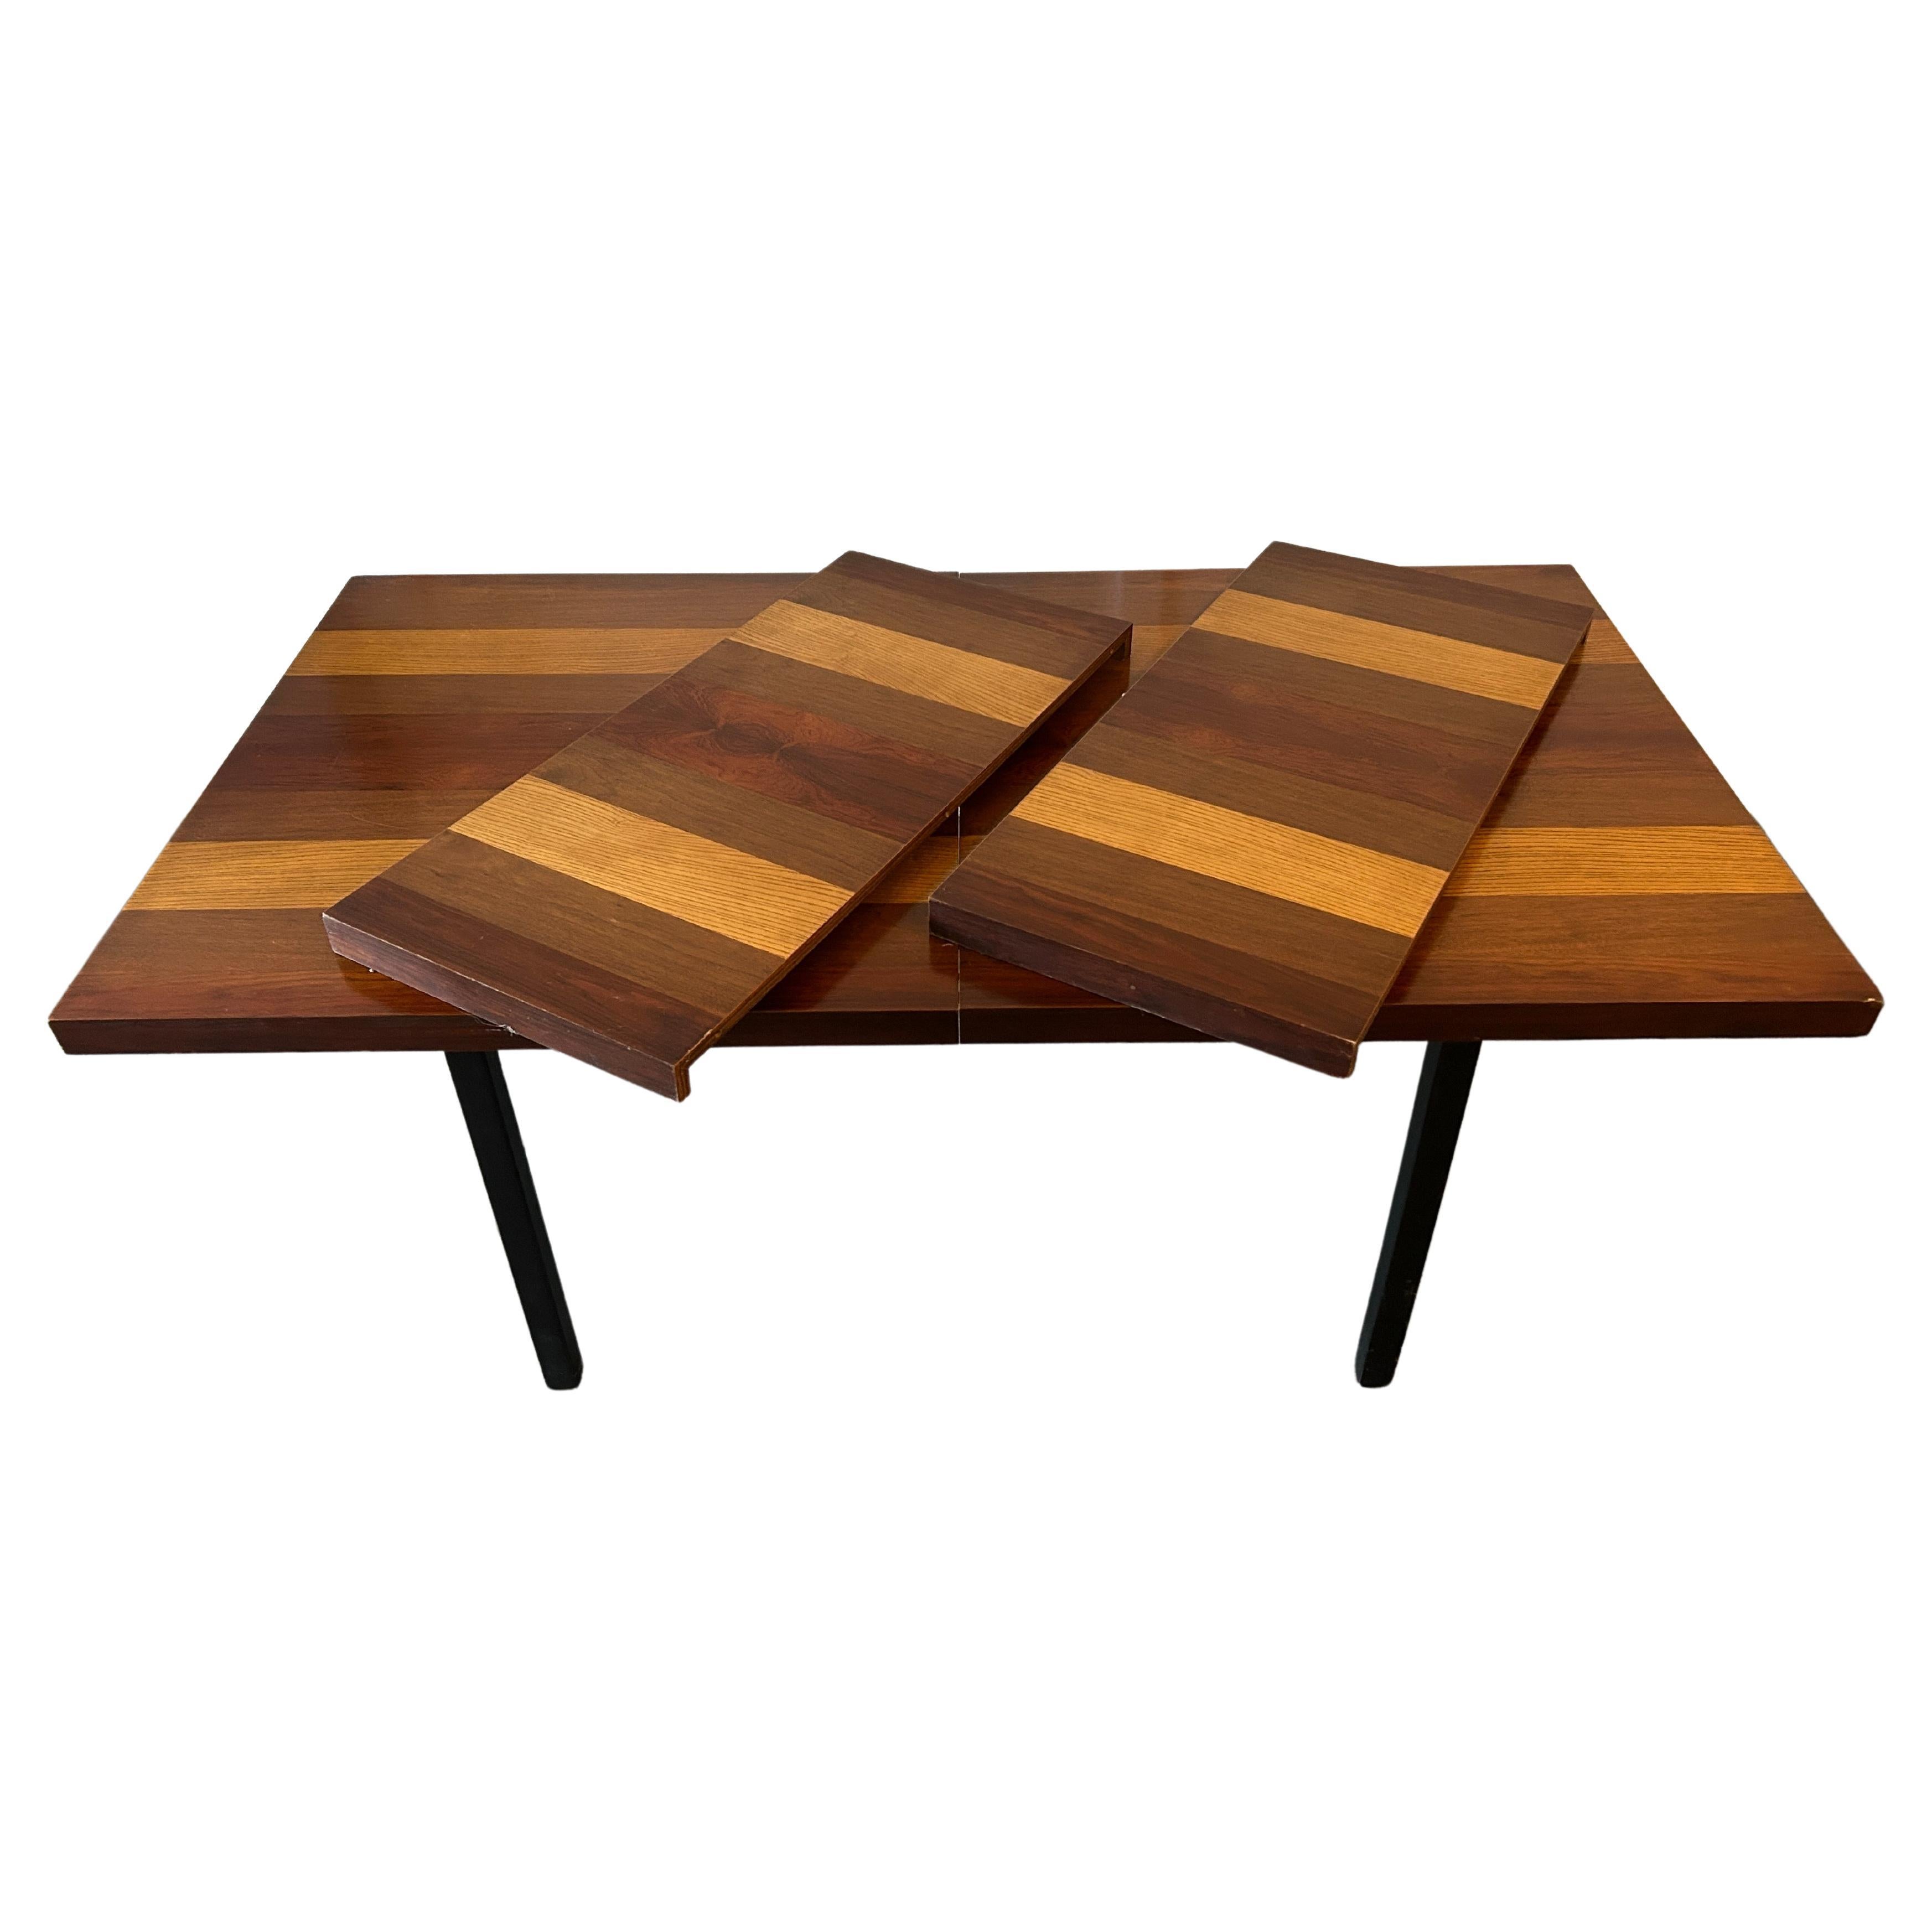 American Midcentury Expandable Dining Table by Milo Baughman with '2' Leaves